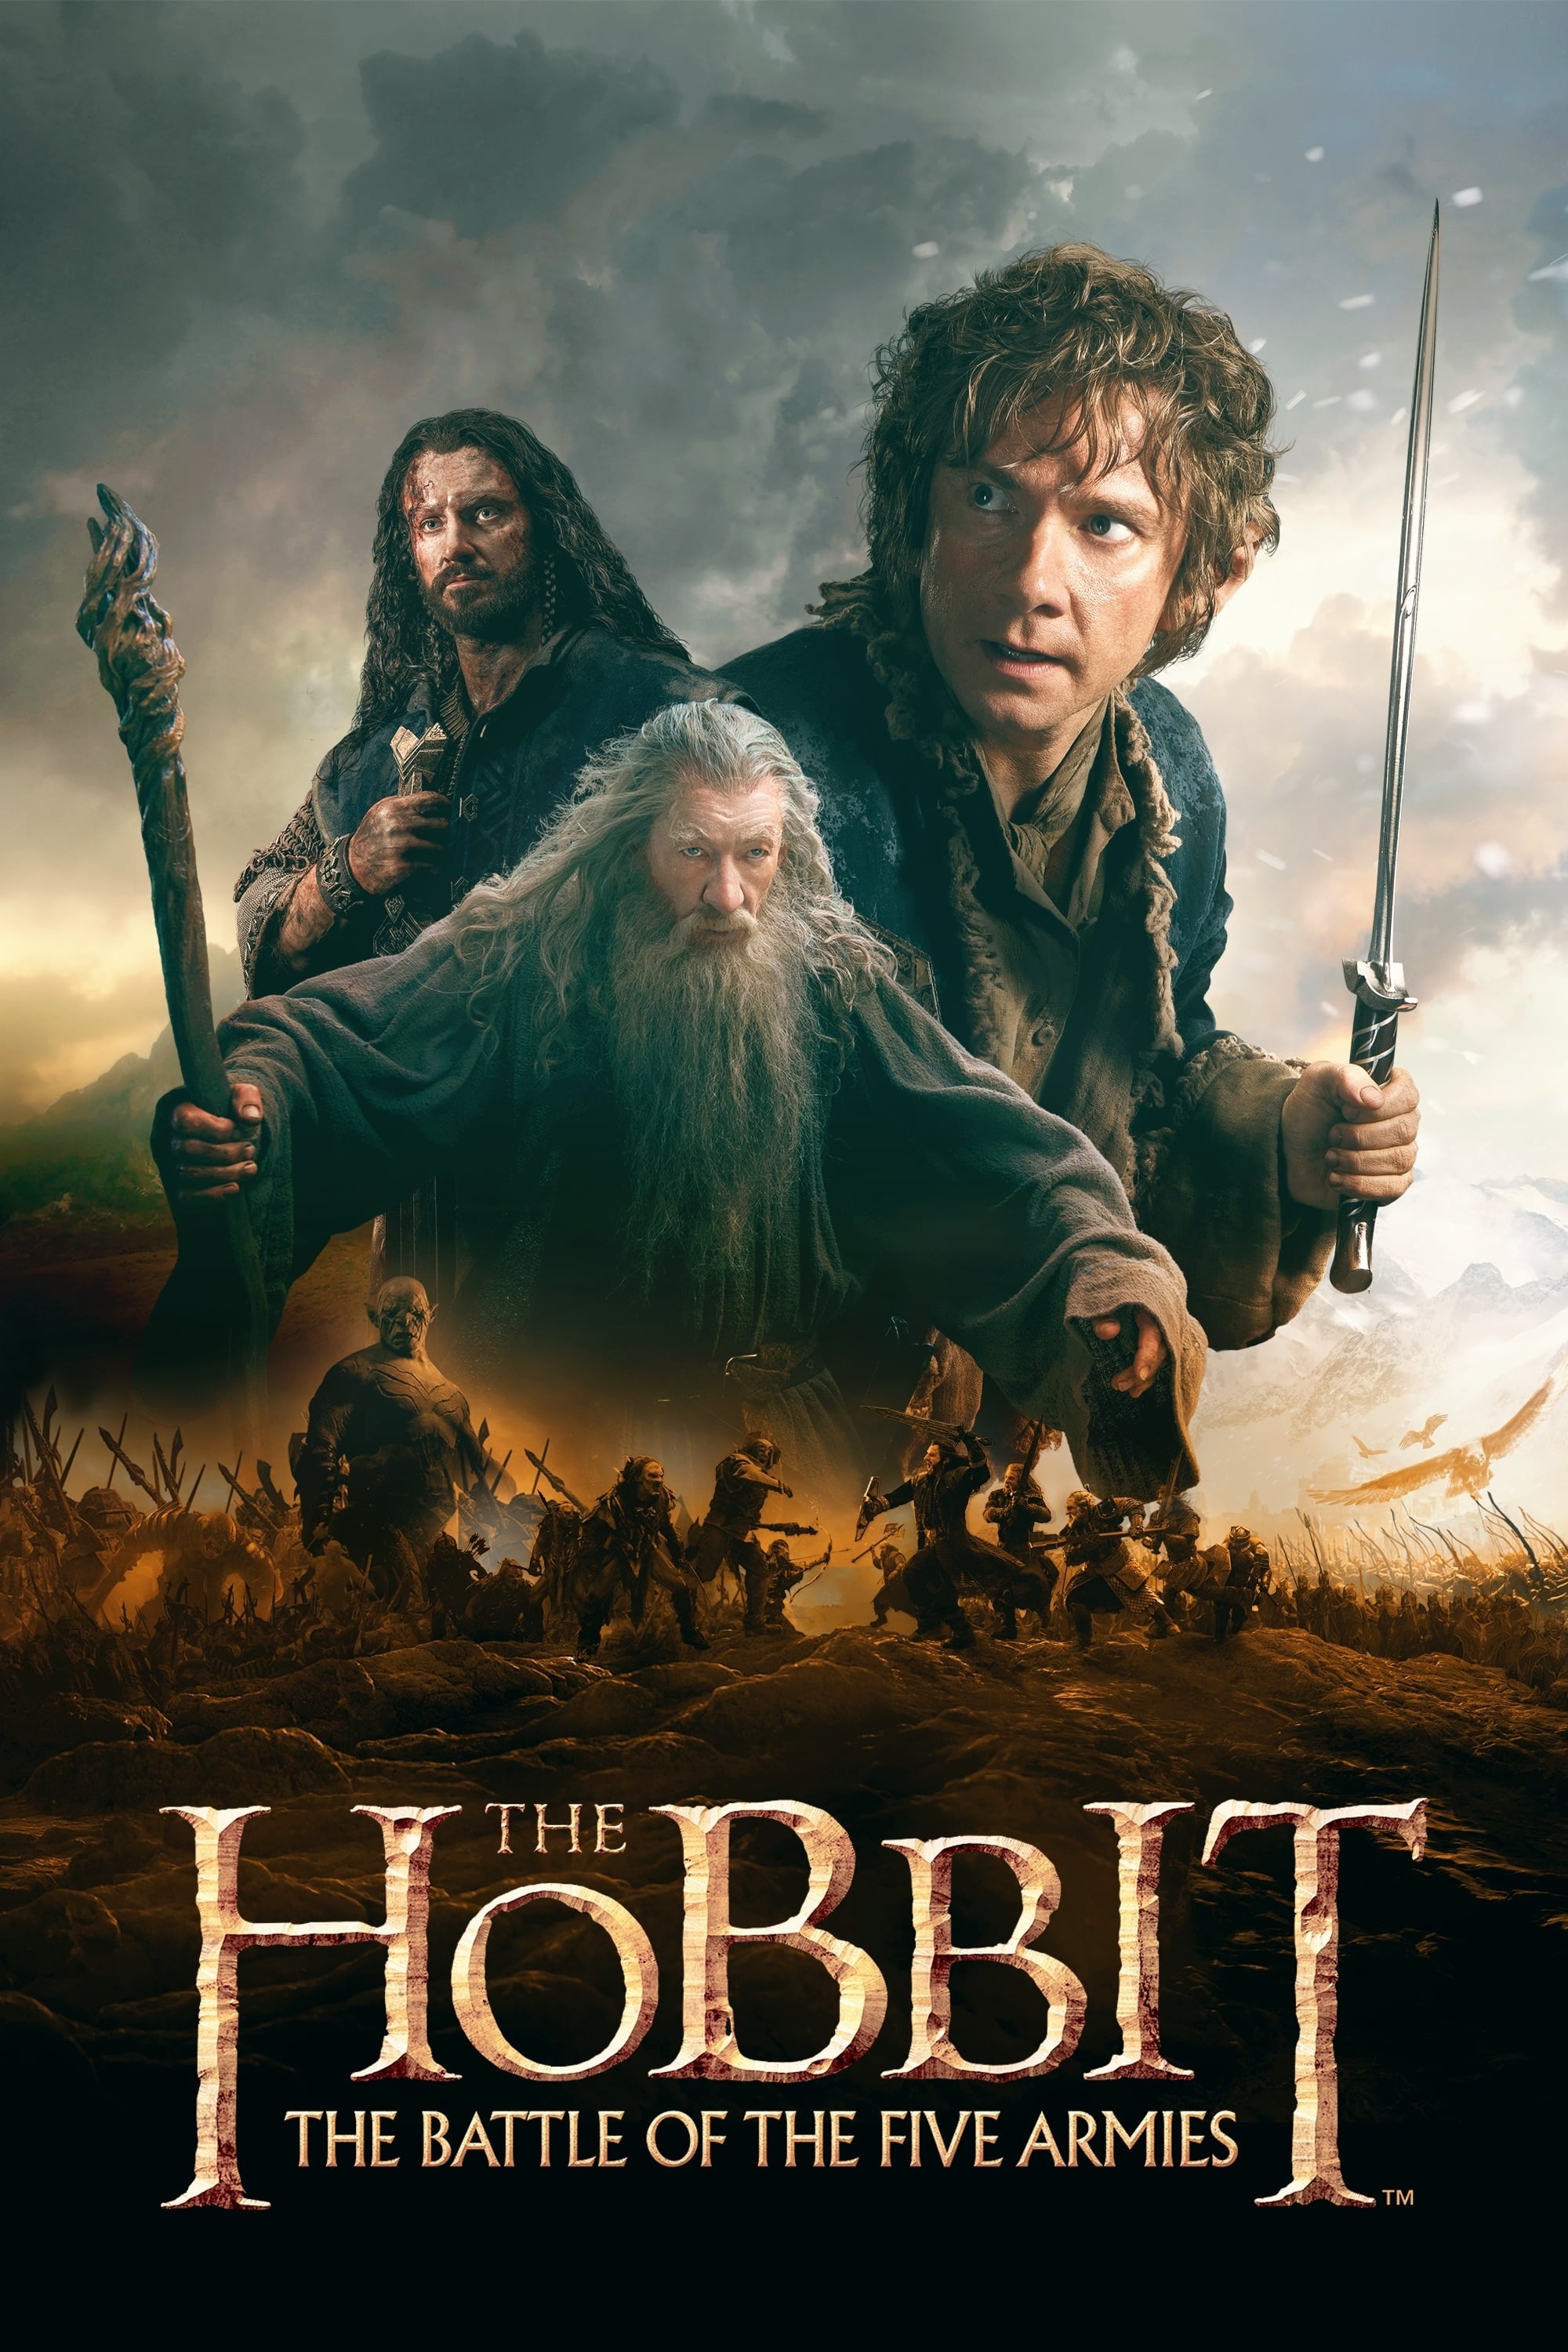 Battle of the Five Armies, Movie posters, Middle-earth war, Epic climax, 2000x3000 HD Handy